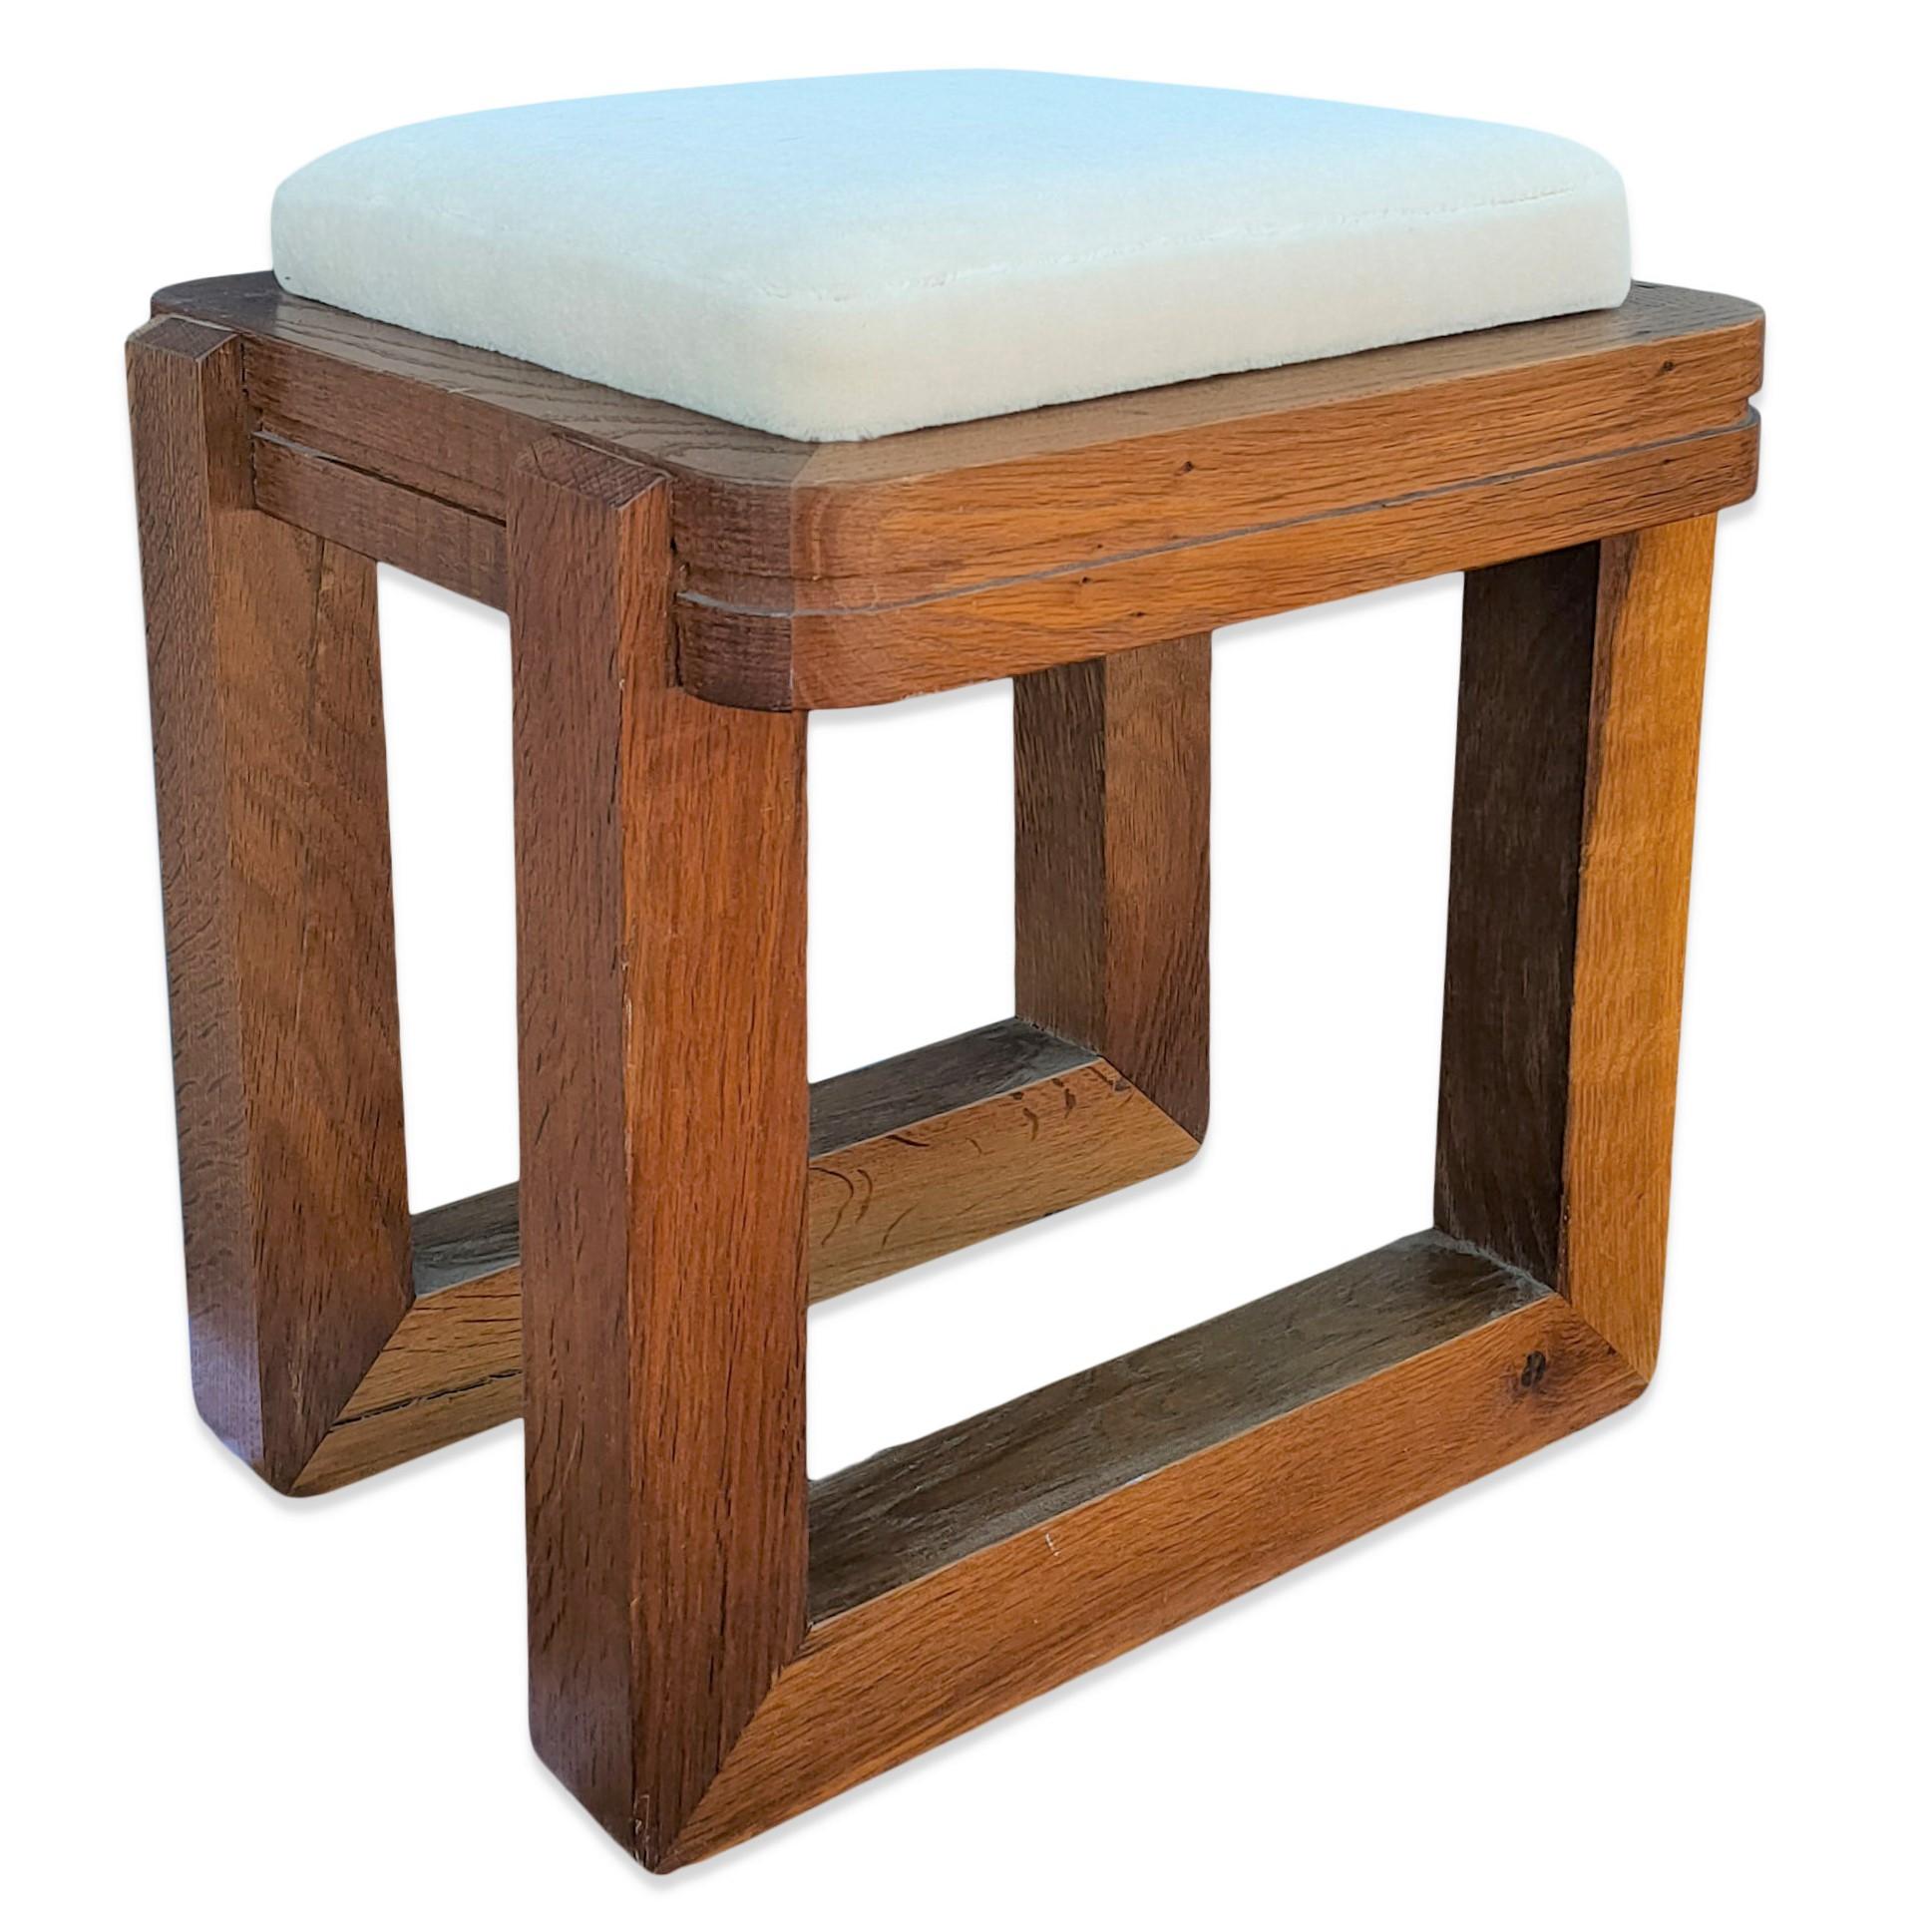 Late 20th Century Solid Oak Modernist Stool with White Mohair Cushion, France, 1970's